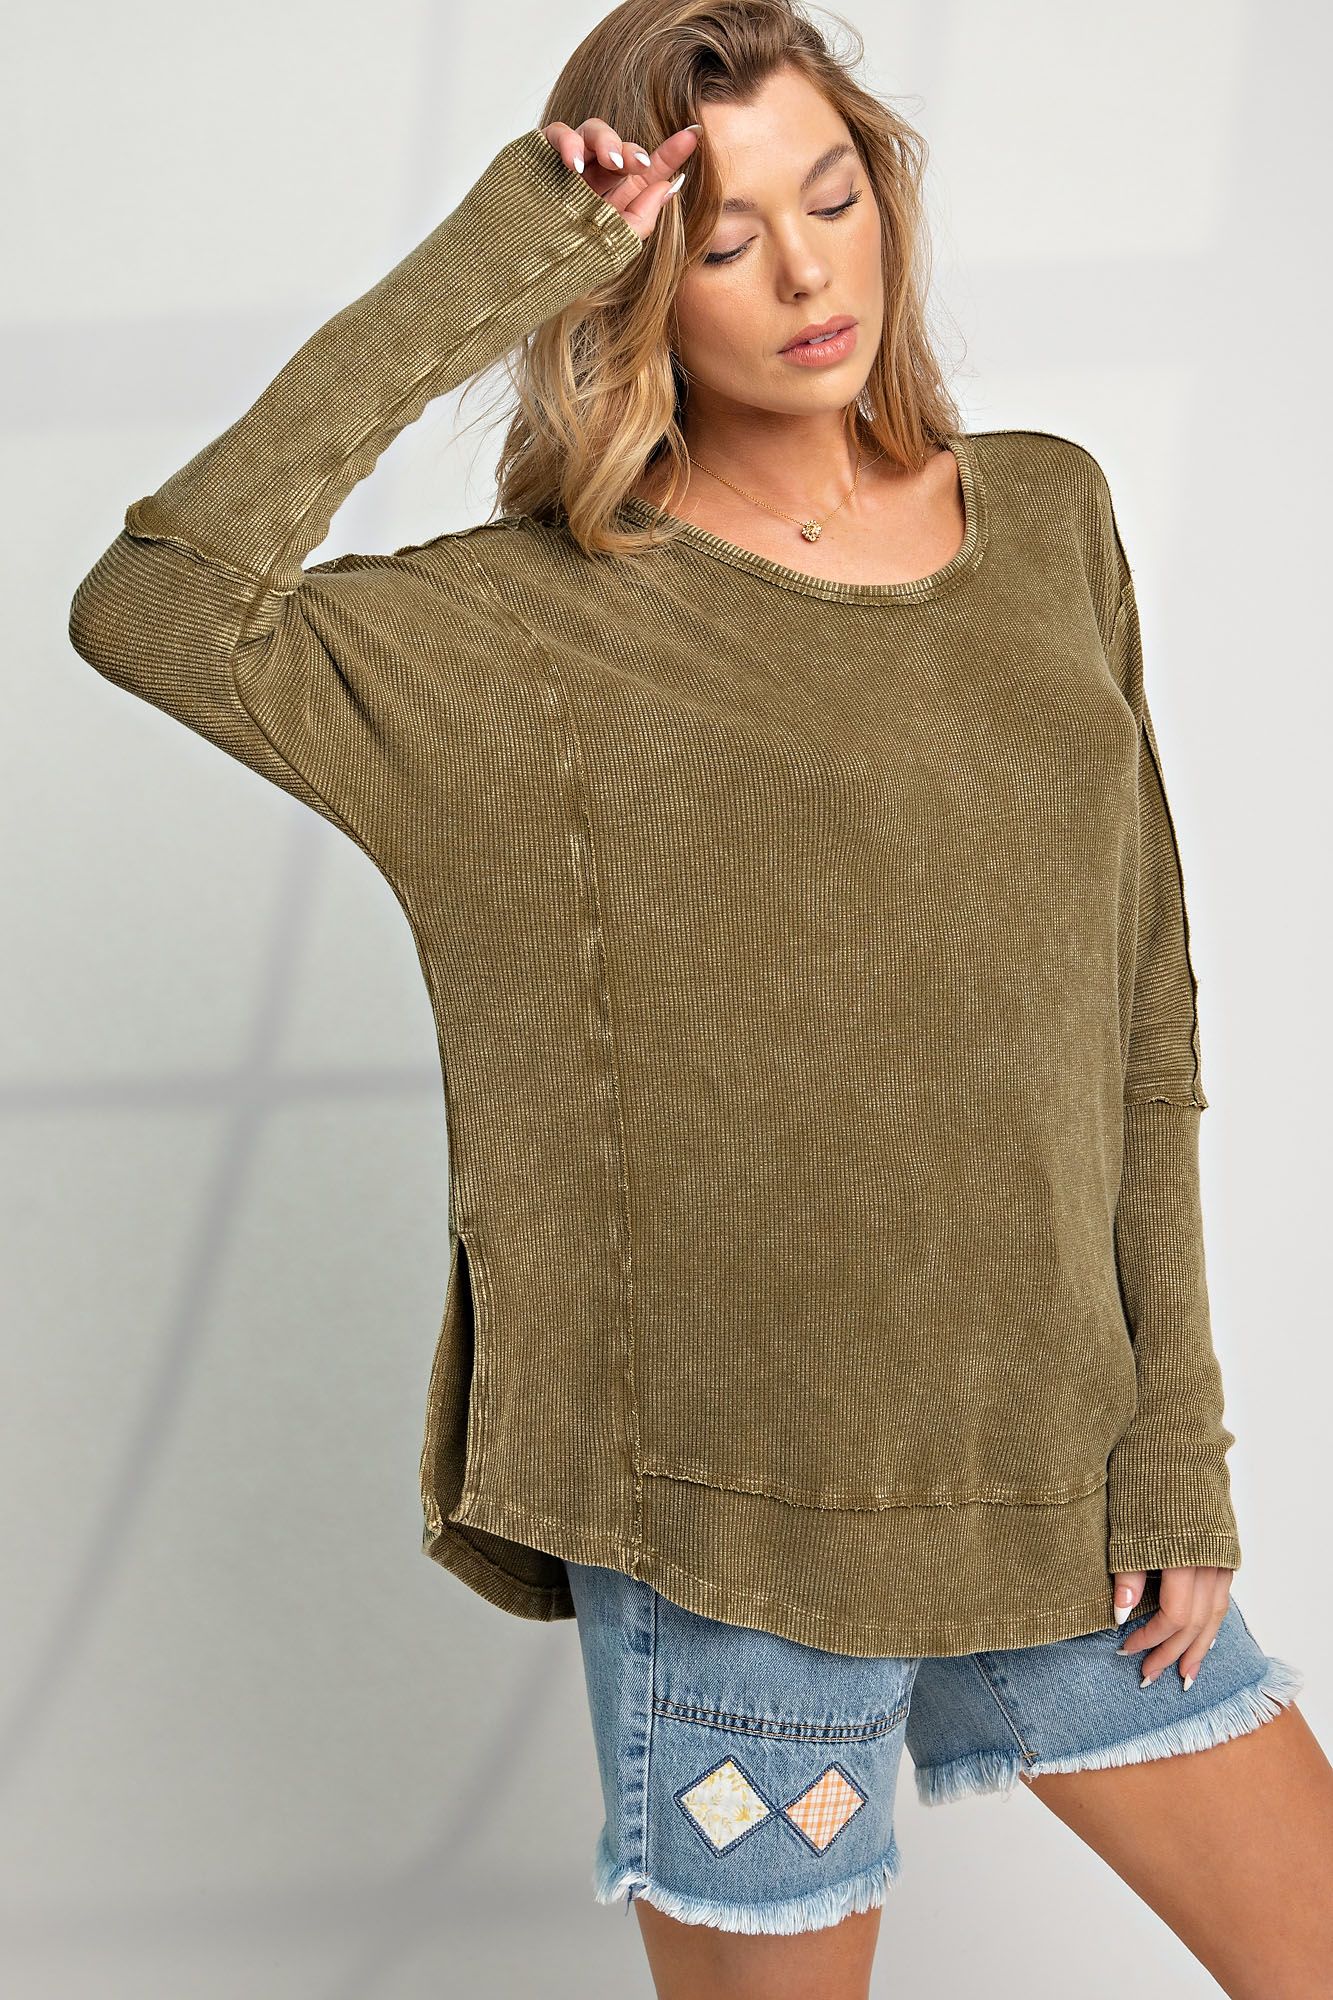 Easel Mineral Washed Rayon Rib Knit Top